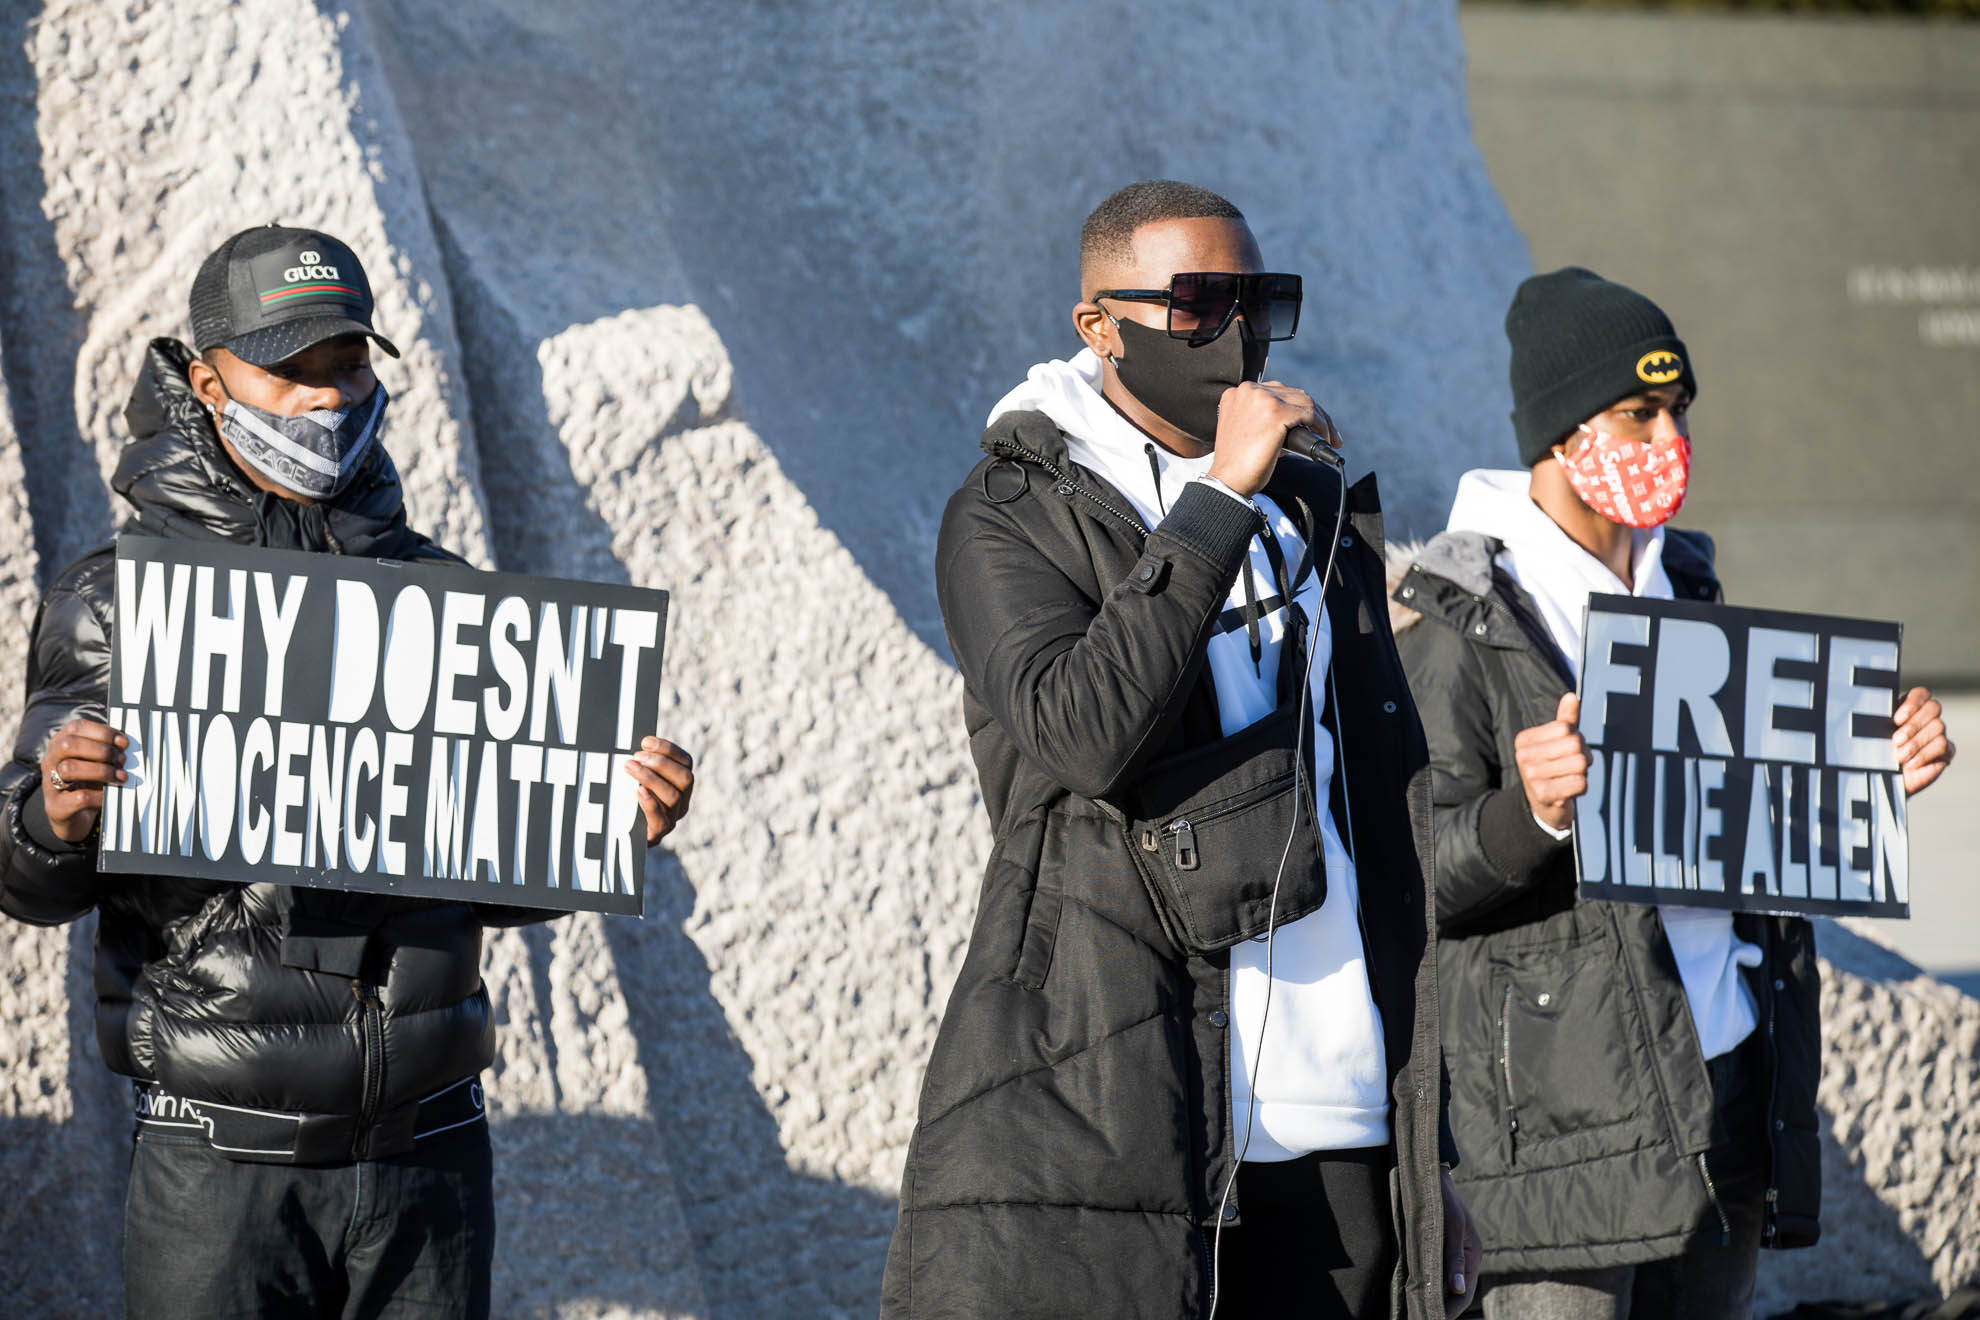 Dustin Higgs’s son, Da’Quan, speaks at a rally at the foot of the MLK memorial in Washington, DC the week before his dad’s execution